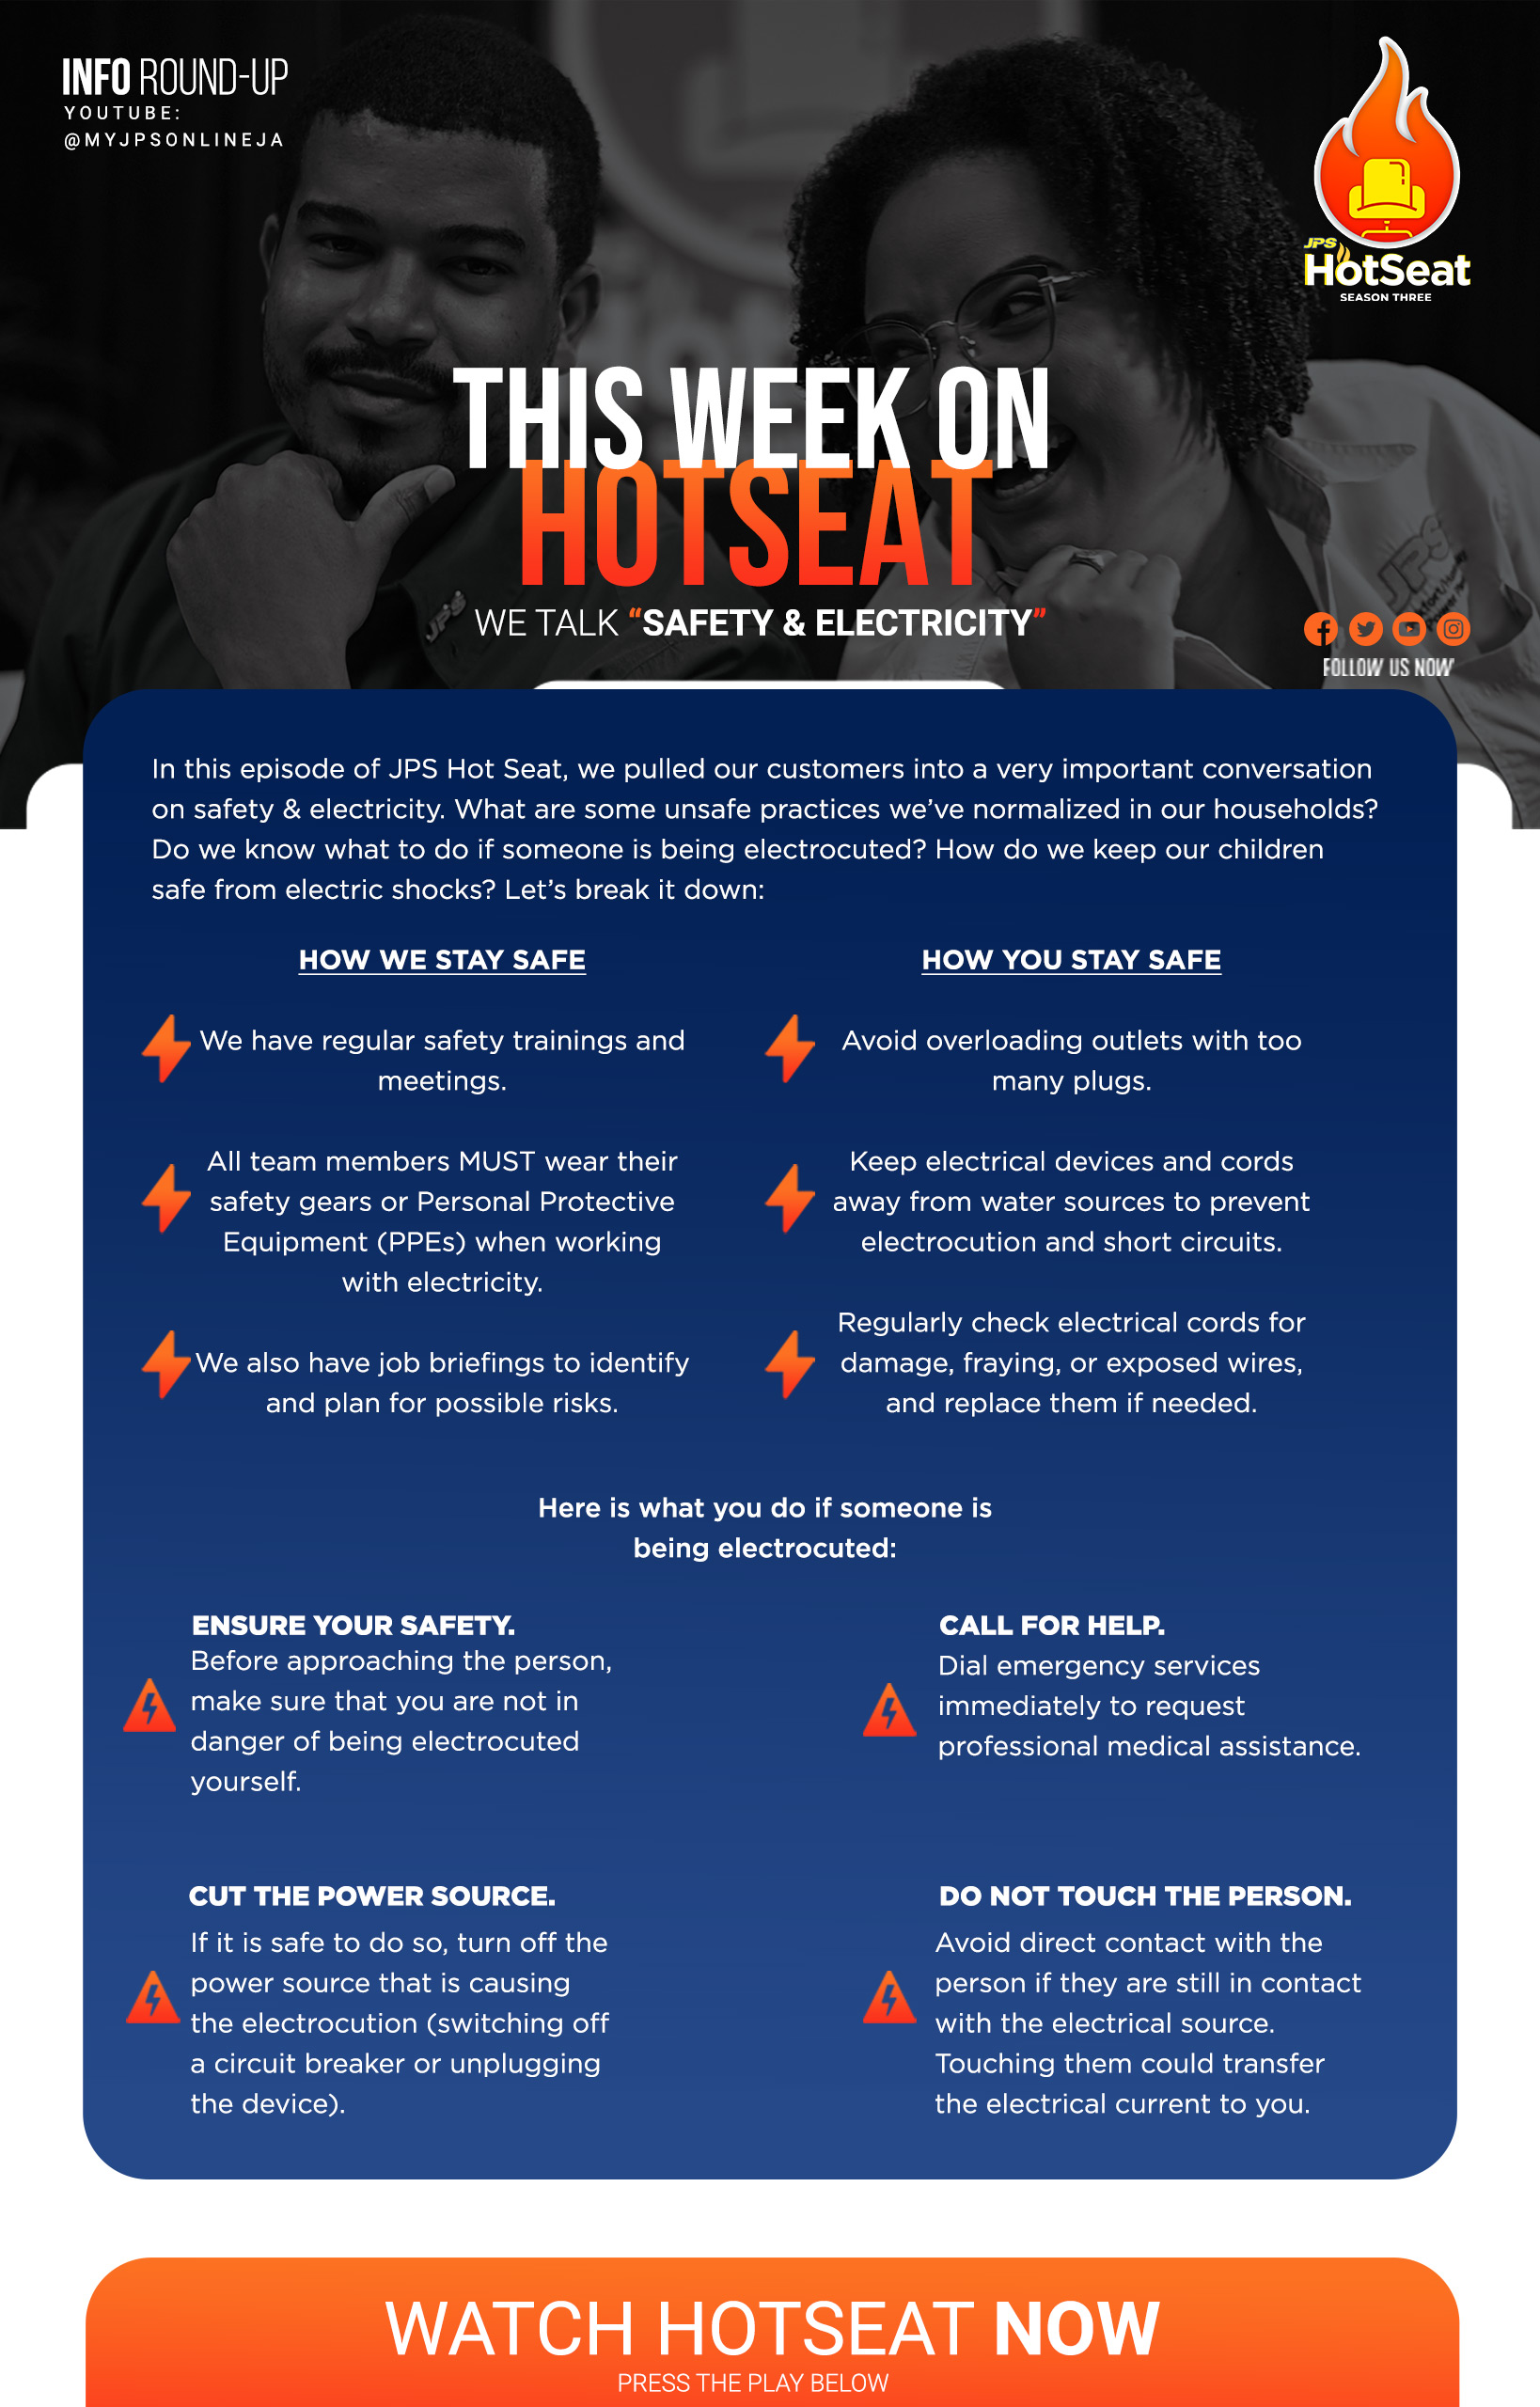 In this episode of JPS Hot Seat, we pulled our customers into a very important conversation on safety & electricity. What are some unsafe practices we've normalized in our households? Do we know what to do if someone is being electrocuted? How do we keep our children safe from electric shocks? Let's break it down: HOW WE STAY SAFE 4 We have regular safety trainings and meetings. All team members MUST wear their safety gears or Personal Protective Equipment (PPEs). We also have job briefings to identify and plan for possible risks. HOW YOU STAY SAFE 4 Avoid overloading outlets with too many plugs. Keep electrical devices and cords awav from water sources to prevent electrocution and short circuits. Regularly check electrical cords for damage, fraying, or exposed wires, and replace them if needed. Here is what vou do if someone is being electrocuted: ENSURE YOUR SAFETY. Before approaching the person, make sure that you are not in danger of being electrocuted vourself. CALL FOR HELP. Dial emergency services immediately to request professional medical assistance. CUT THE POWER SOURCE. If it is safe to do so, turn off the power source that is causing the electrocution. (switching off a circuit breaker or unplugging the device) DO NOT TOUCH THE PERSON. Avoid direct contact with the person if they are still in contact with the electrical source. Touching them could transfer the electrical current to you.